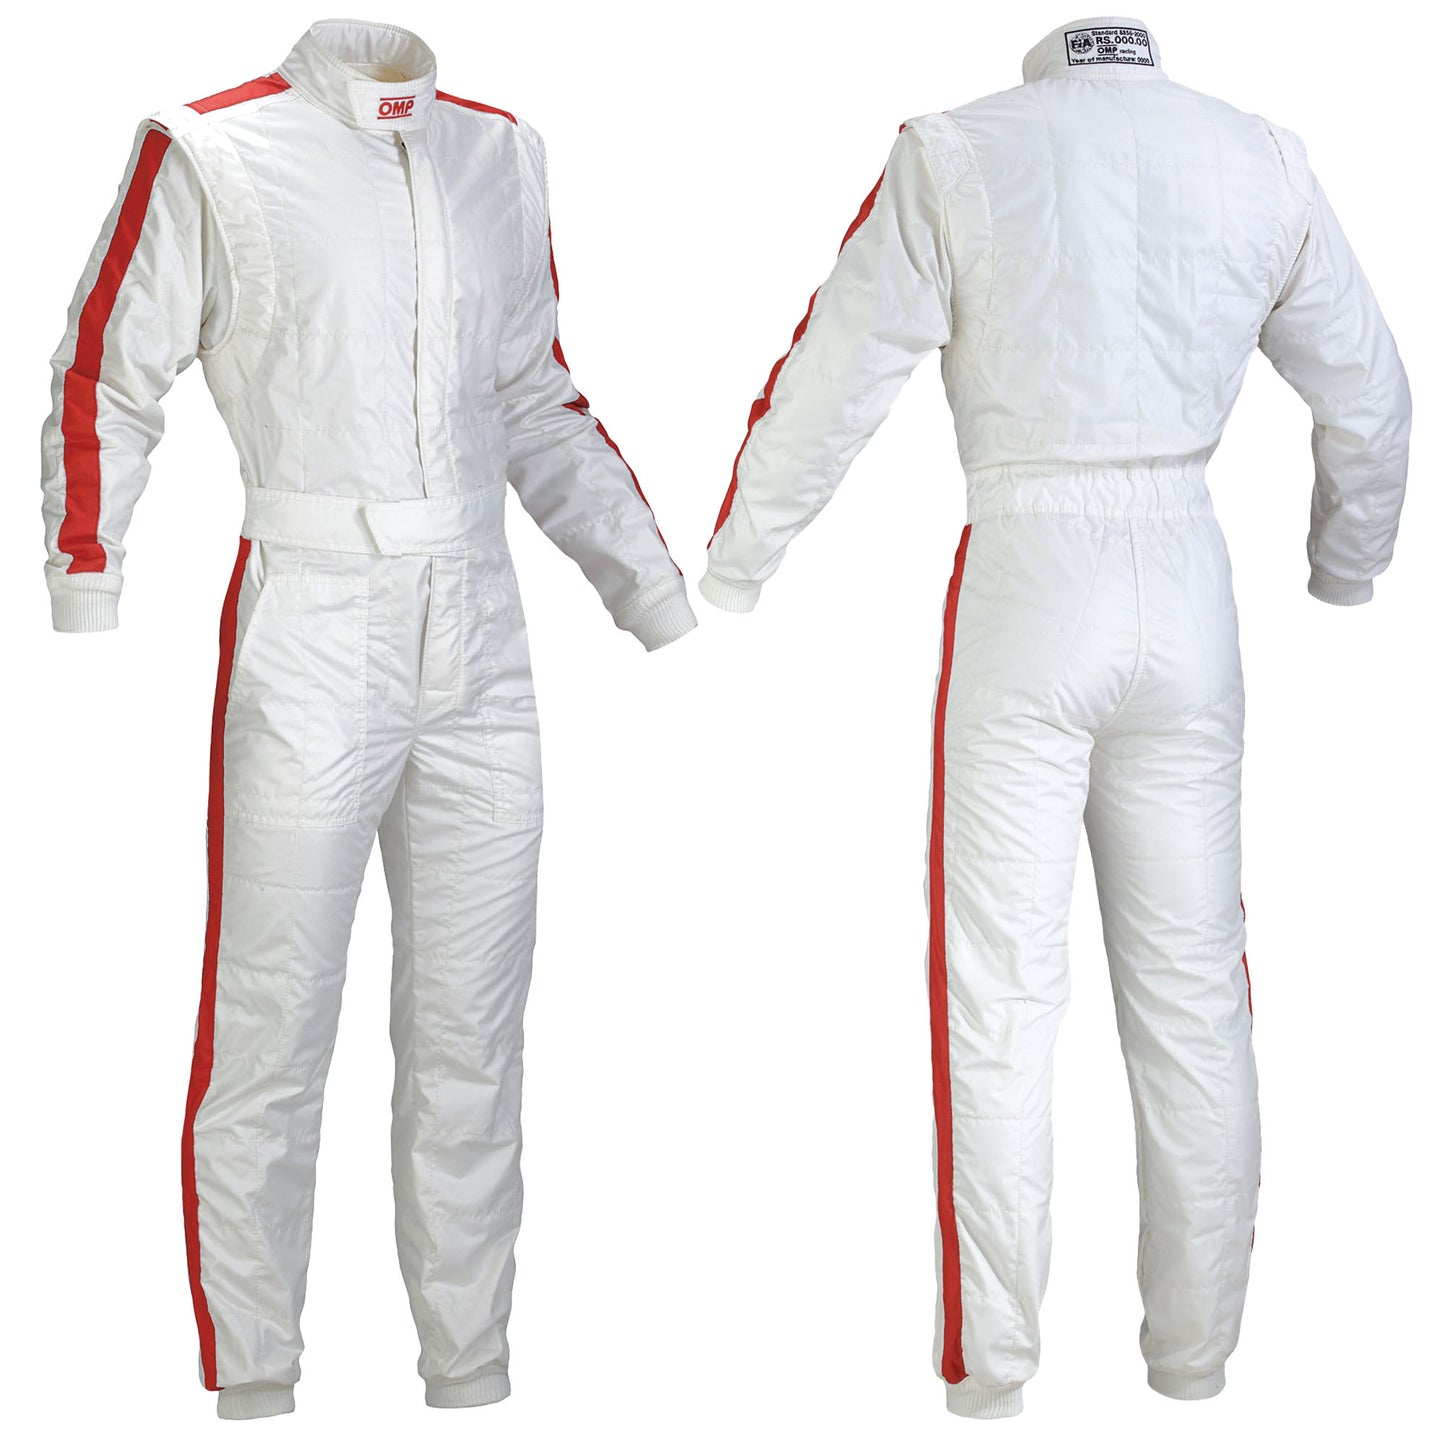 OMP One Vintage Race Suit F1 1960s Style FIA 8856-2018 Fireproof Racing Rally